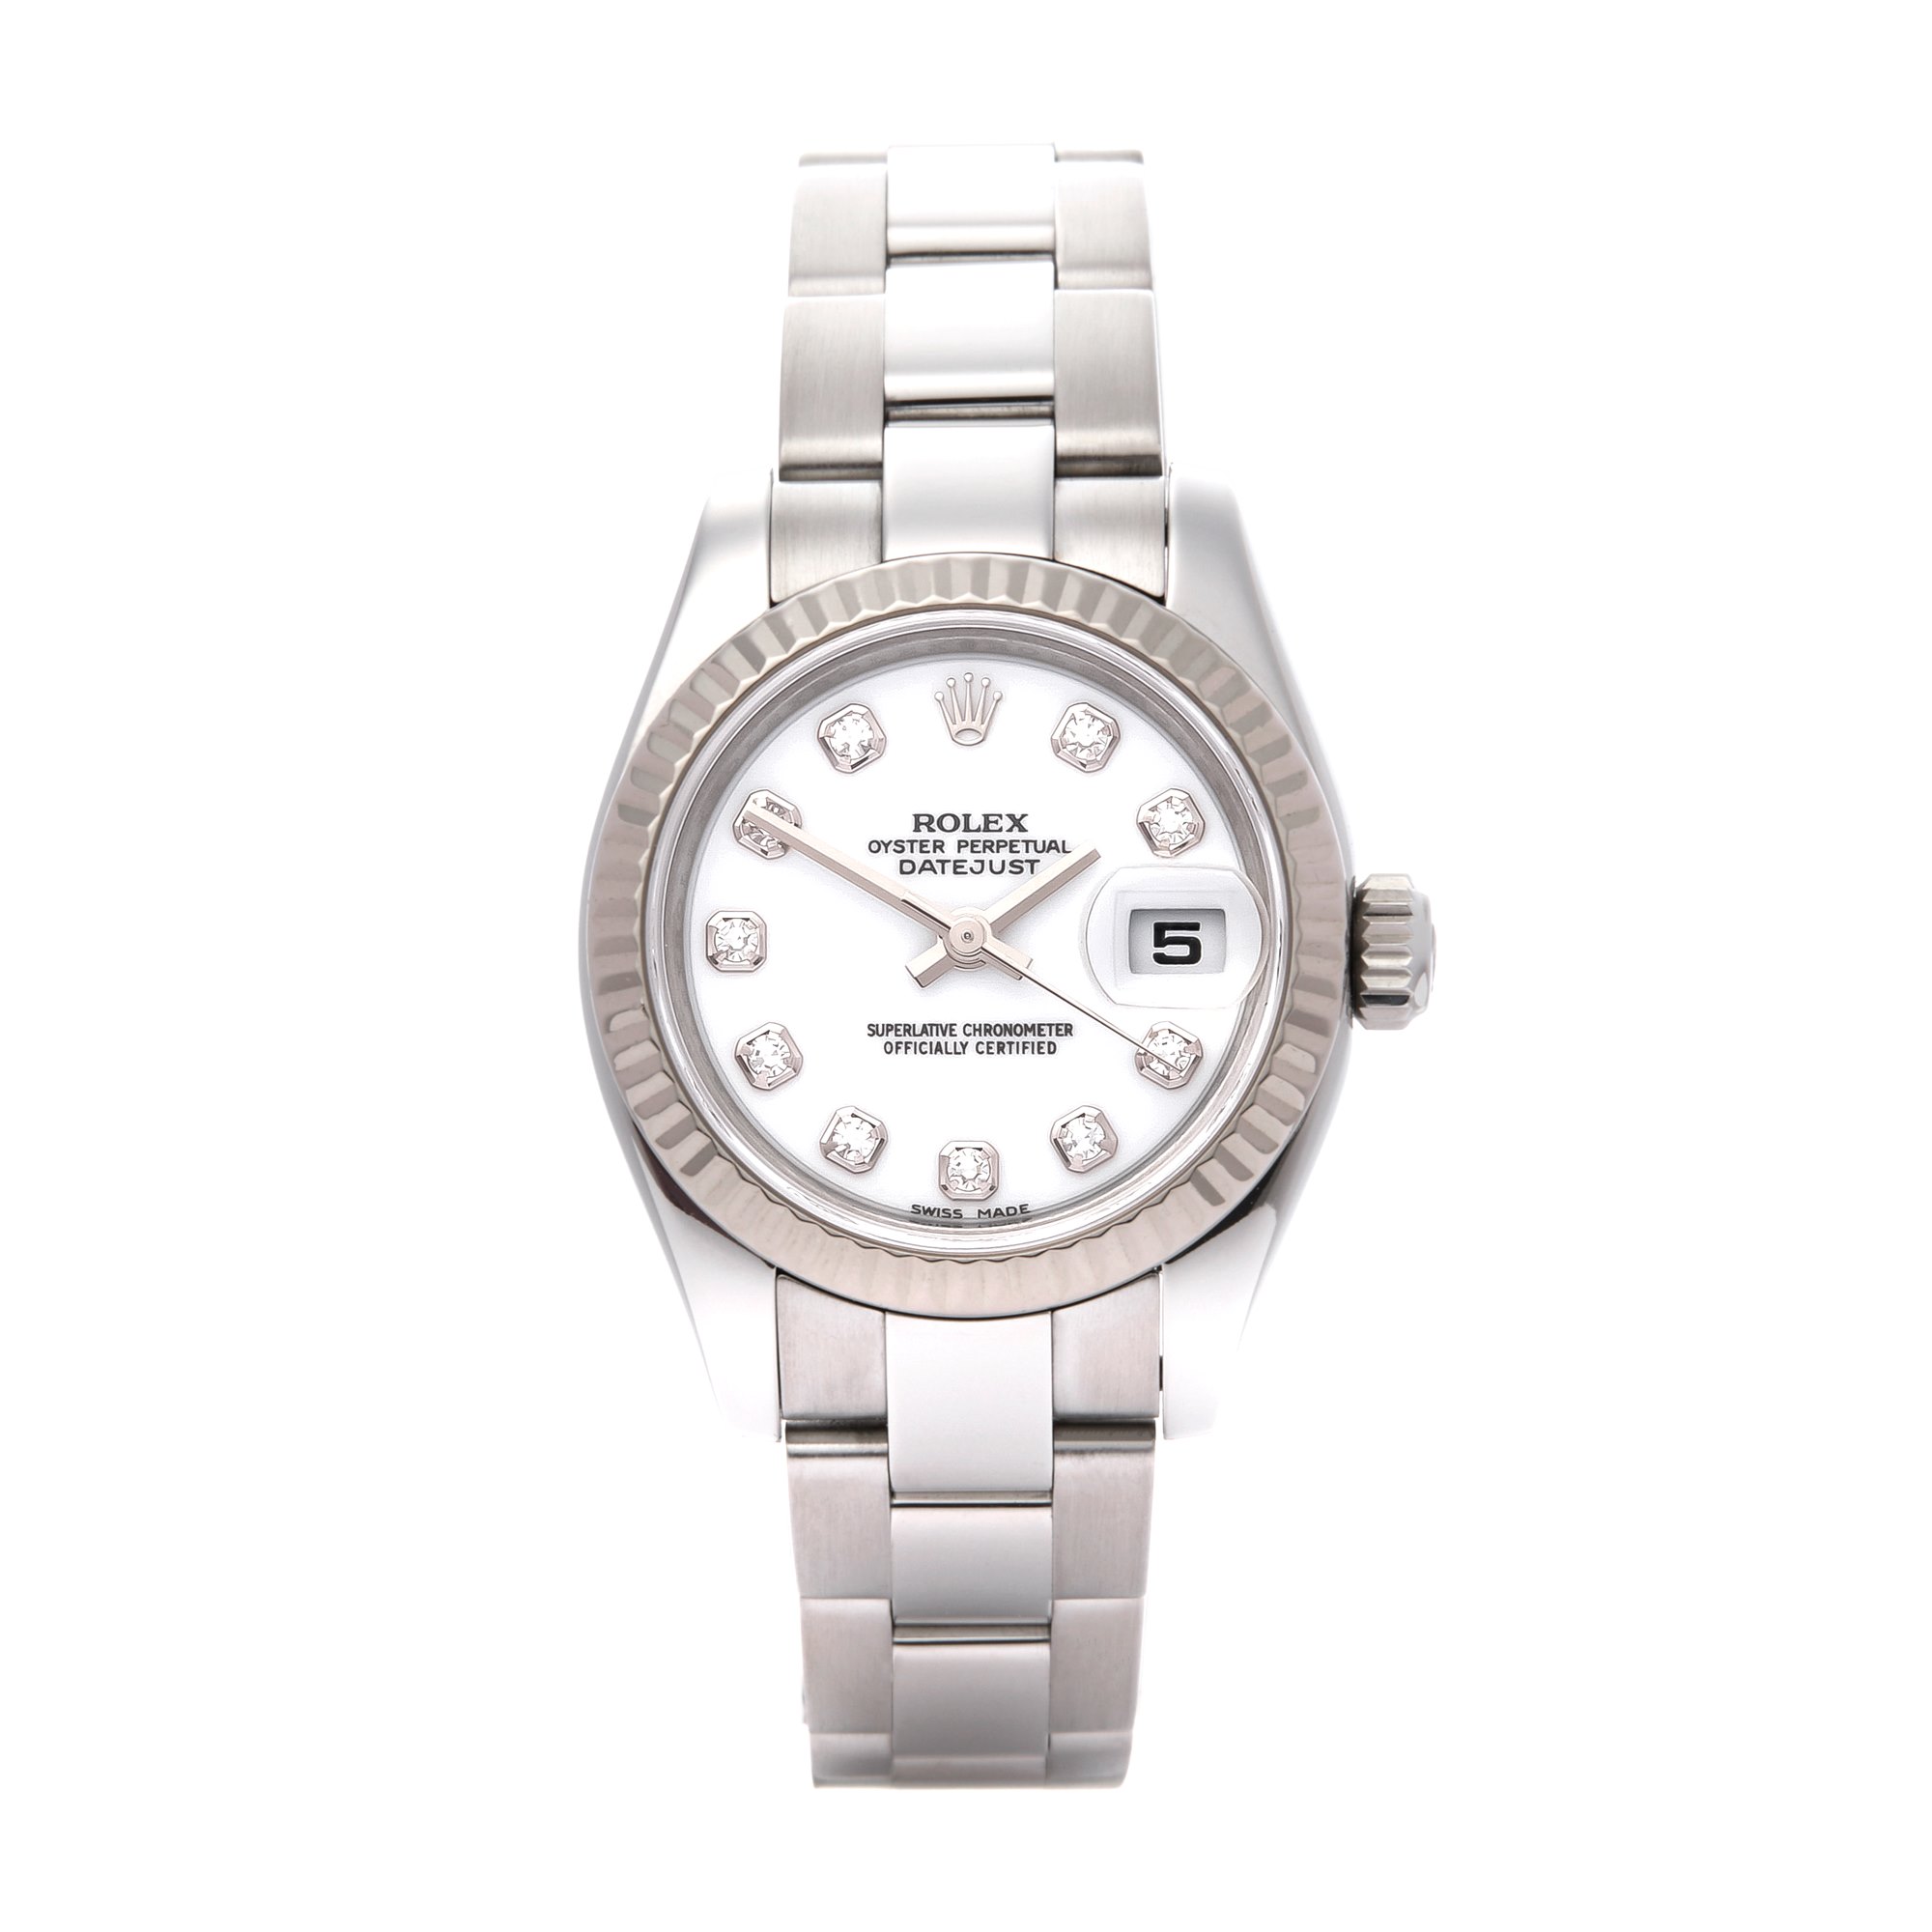 Rolex Oyster Perpetual 26 White Gold & Stainless Steel 179174